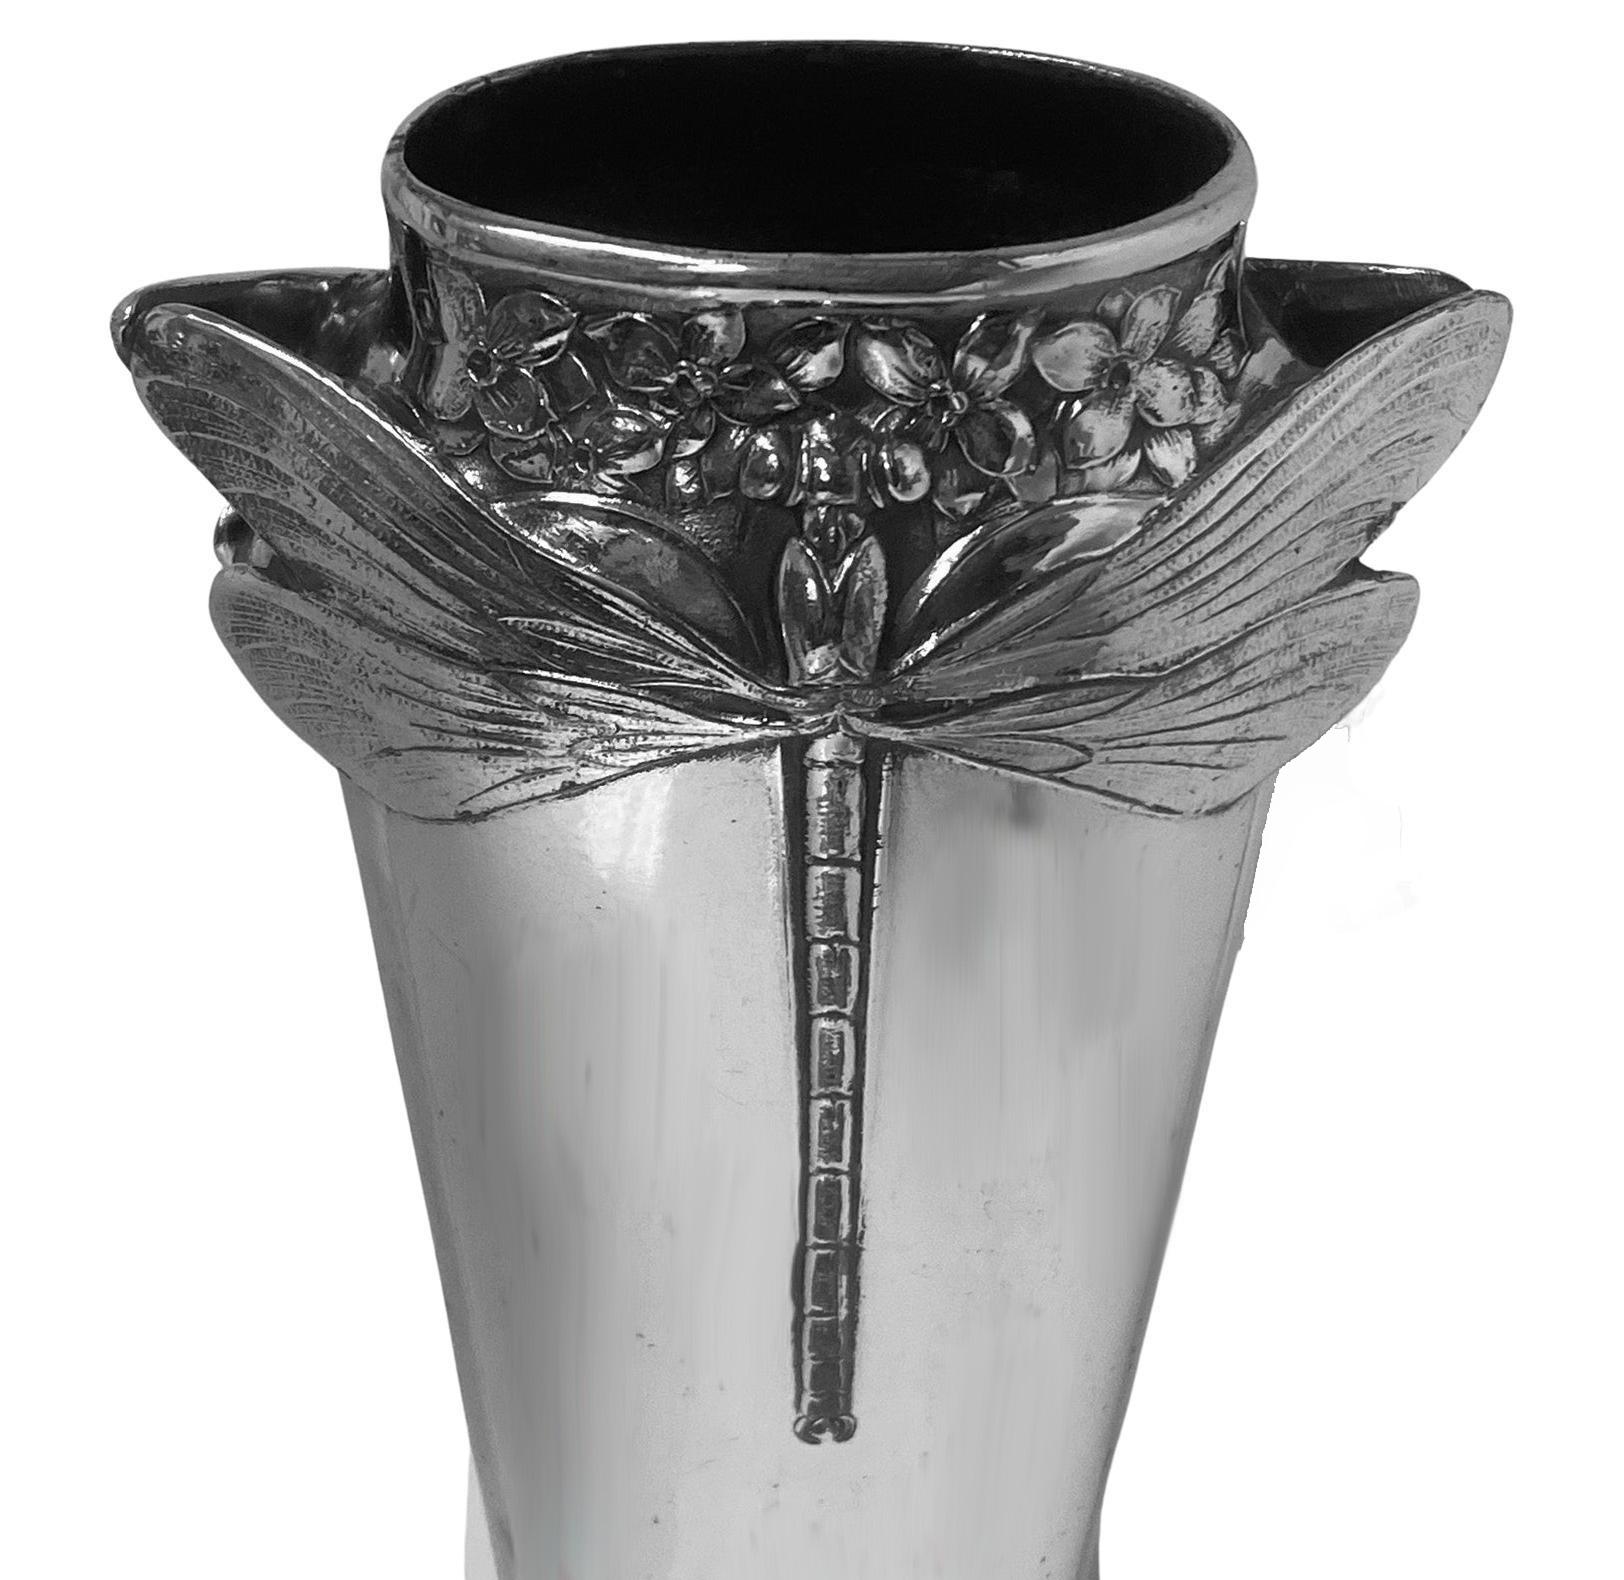 Antique Art Nouveau Christofle silver plate Dragonfly vase, France C.1900. The vase on oval base rising to tapered body, elaborately decorated with raised dragonflies and tendril foliage design. Measures: Height: 7.125 inches. Width (handle to